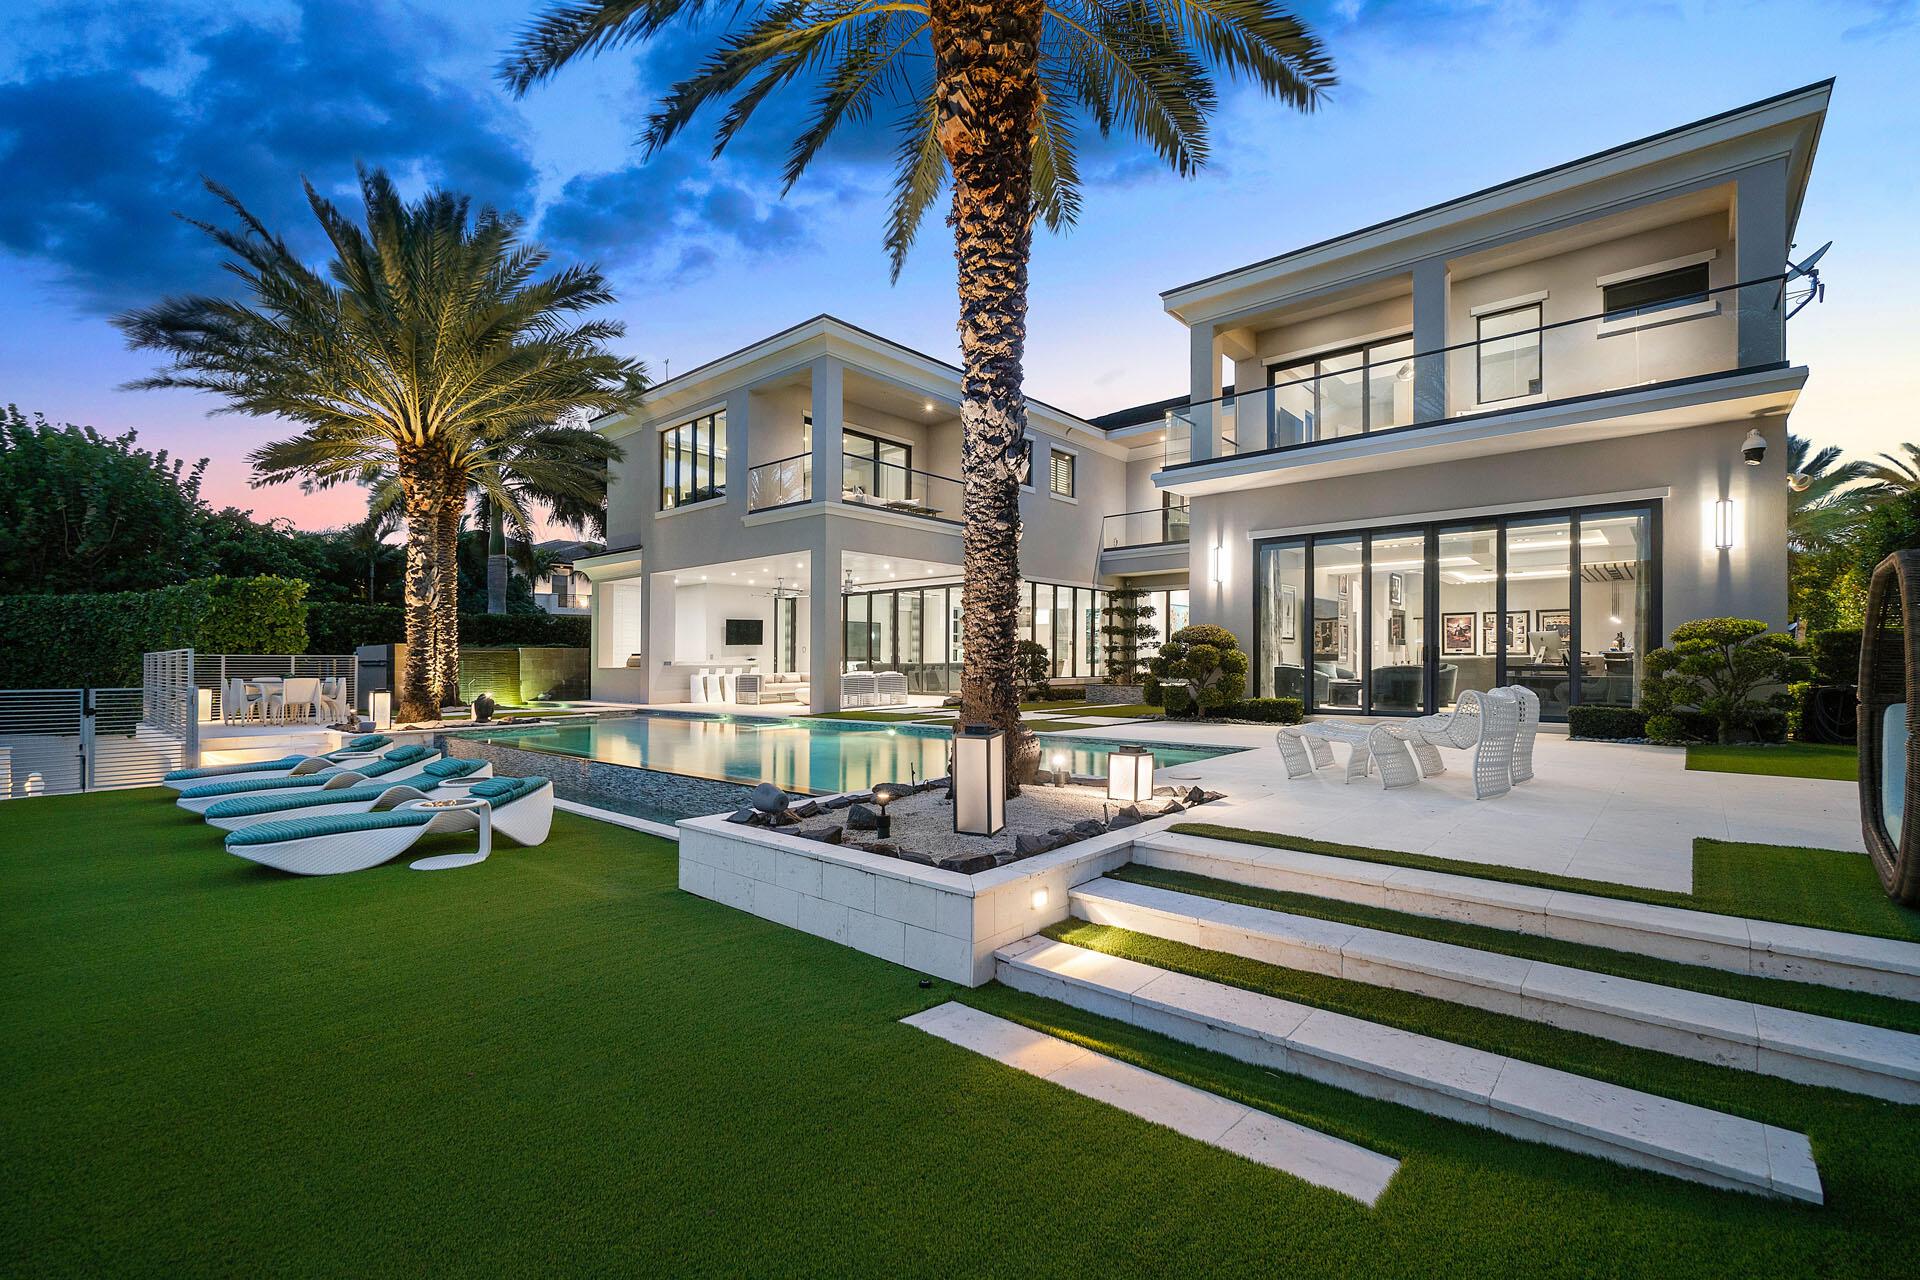 290 South Maya Palm Drive is a stunning 5-bedroom, 6.2-bathroom waterfront estate from Bloomfield Construction offering +9,000sf of modern, coastal-glam living on RPYCC's Grand Canal. The home surrounds a resort-style backyard with turf grass, infinity pool, separate spa and lanai, and all major rooms face the 110' of waterfrontage. Striking details are found throughout: a lofty 2-story gallery foyer, island with agate snack bar, floor-to-ceiling agate wall, recessed architectural lighting, floor-to-ceiling marble wall with inset gas linear fireplace, massive club room with underlit resin bar, motorized sliding glass doors leading to the covered summer kitchen, glass rail balconies with turf floors, gleaming his & her master suites with boutique closets, and 4-bay car lift capable garage.